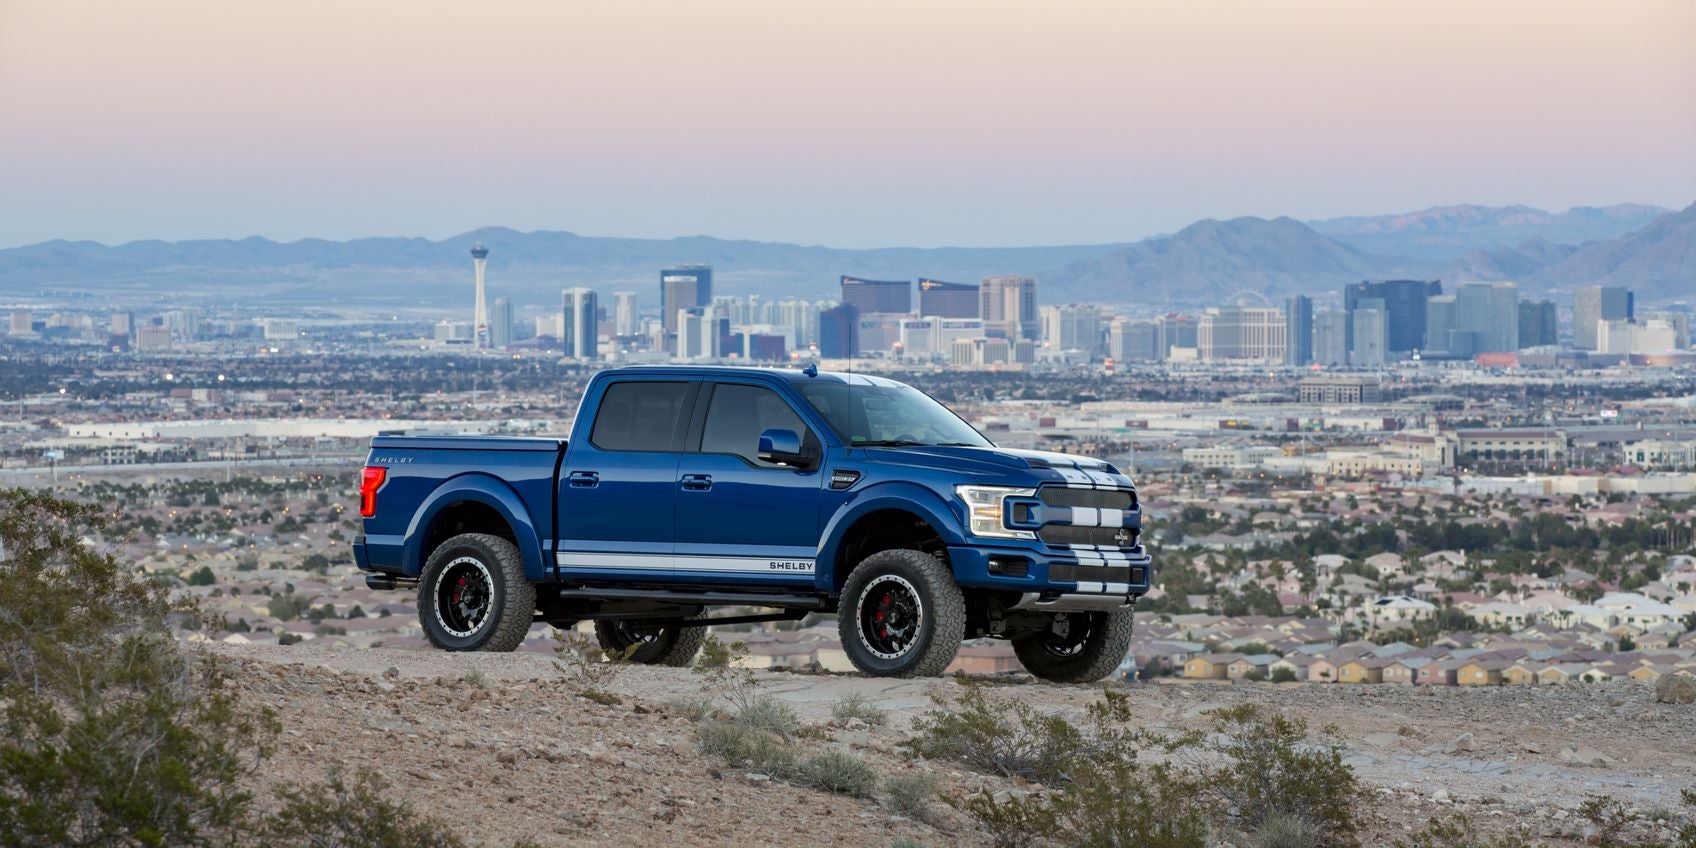 Shelby F-150 Truck